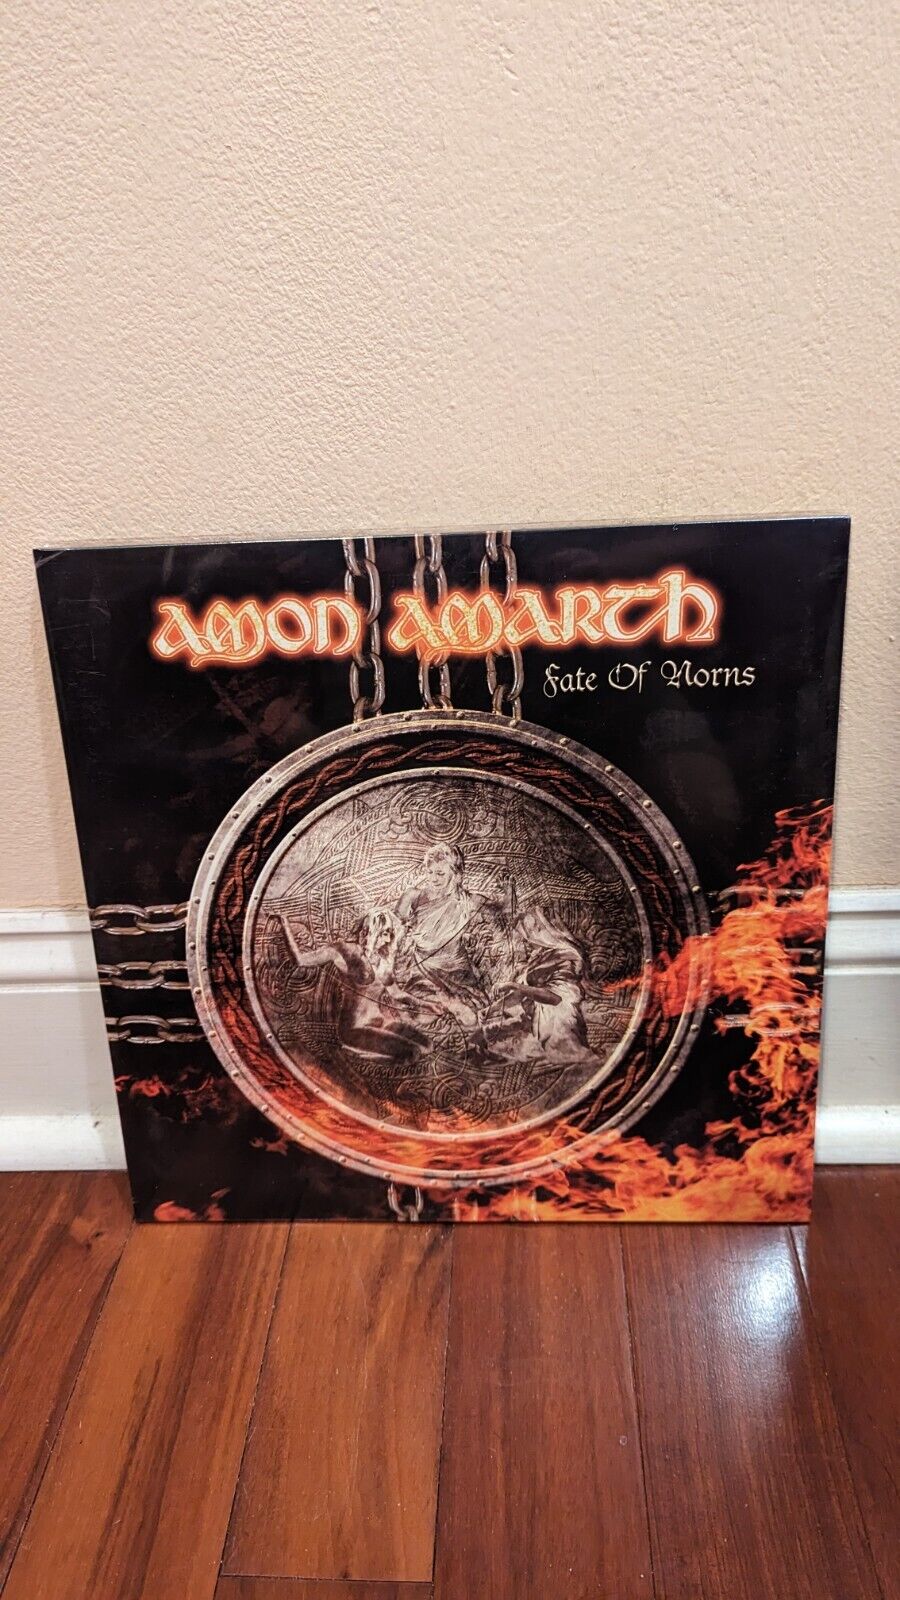 AMON AMARTH FATE OF NORNS LP VINYL RECORDS BRAND NEW AND SEALED!!!!